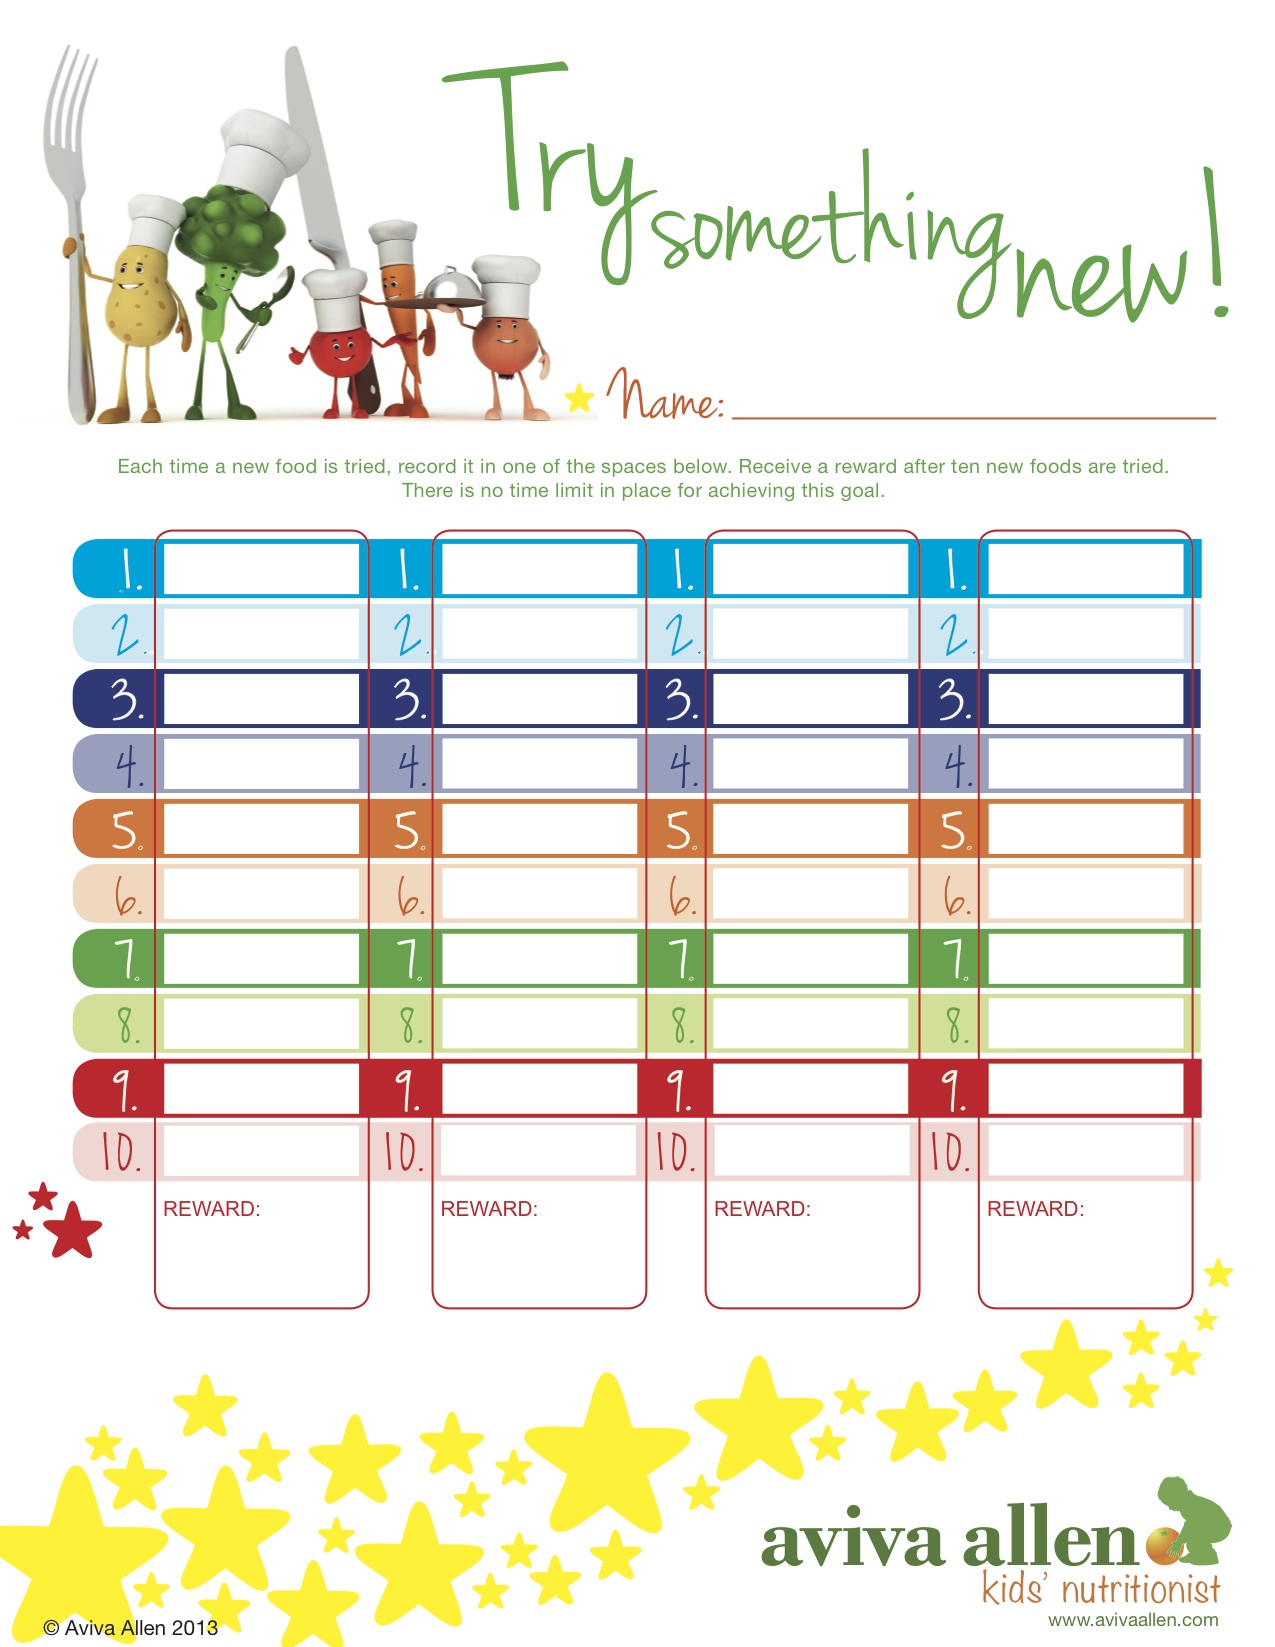 Try something new chart - image